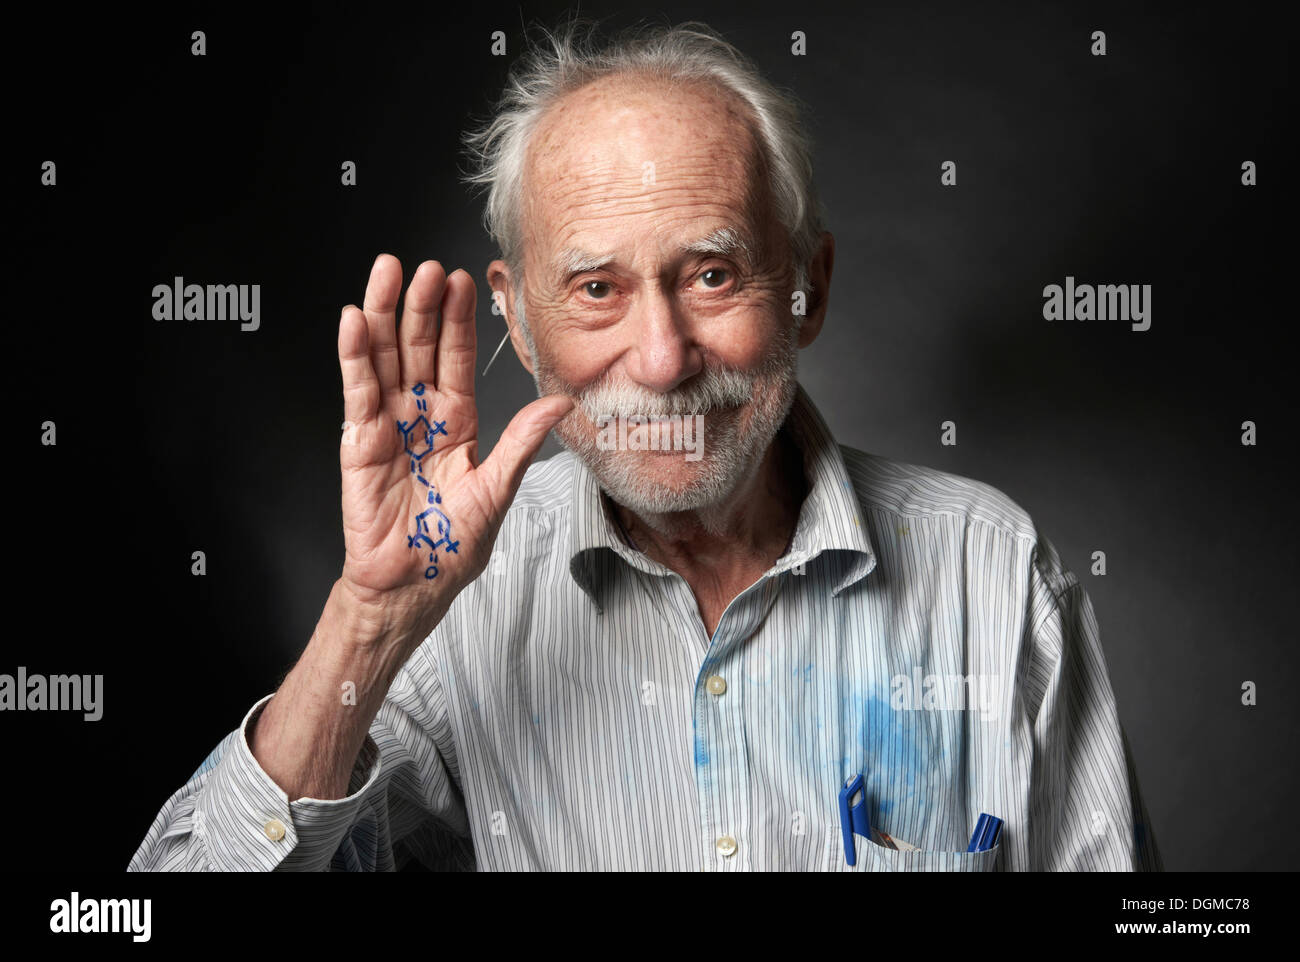 Elderly man with a chemical formula written on his hand Stock Photo